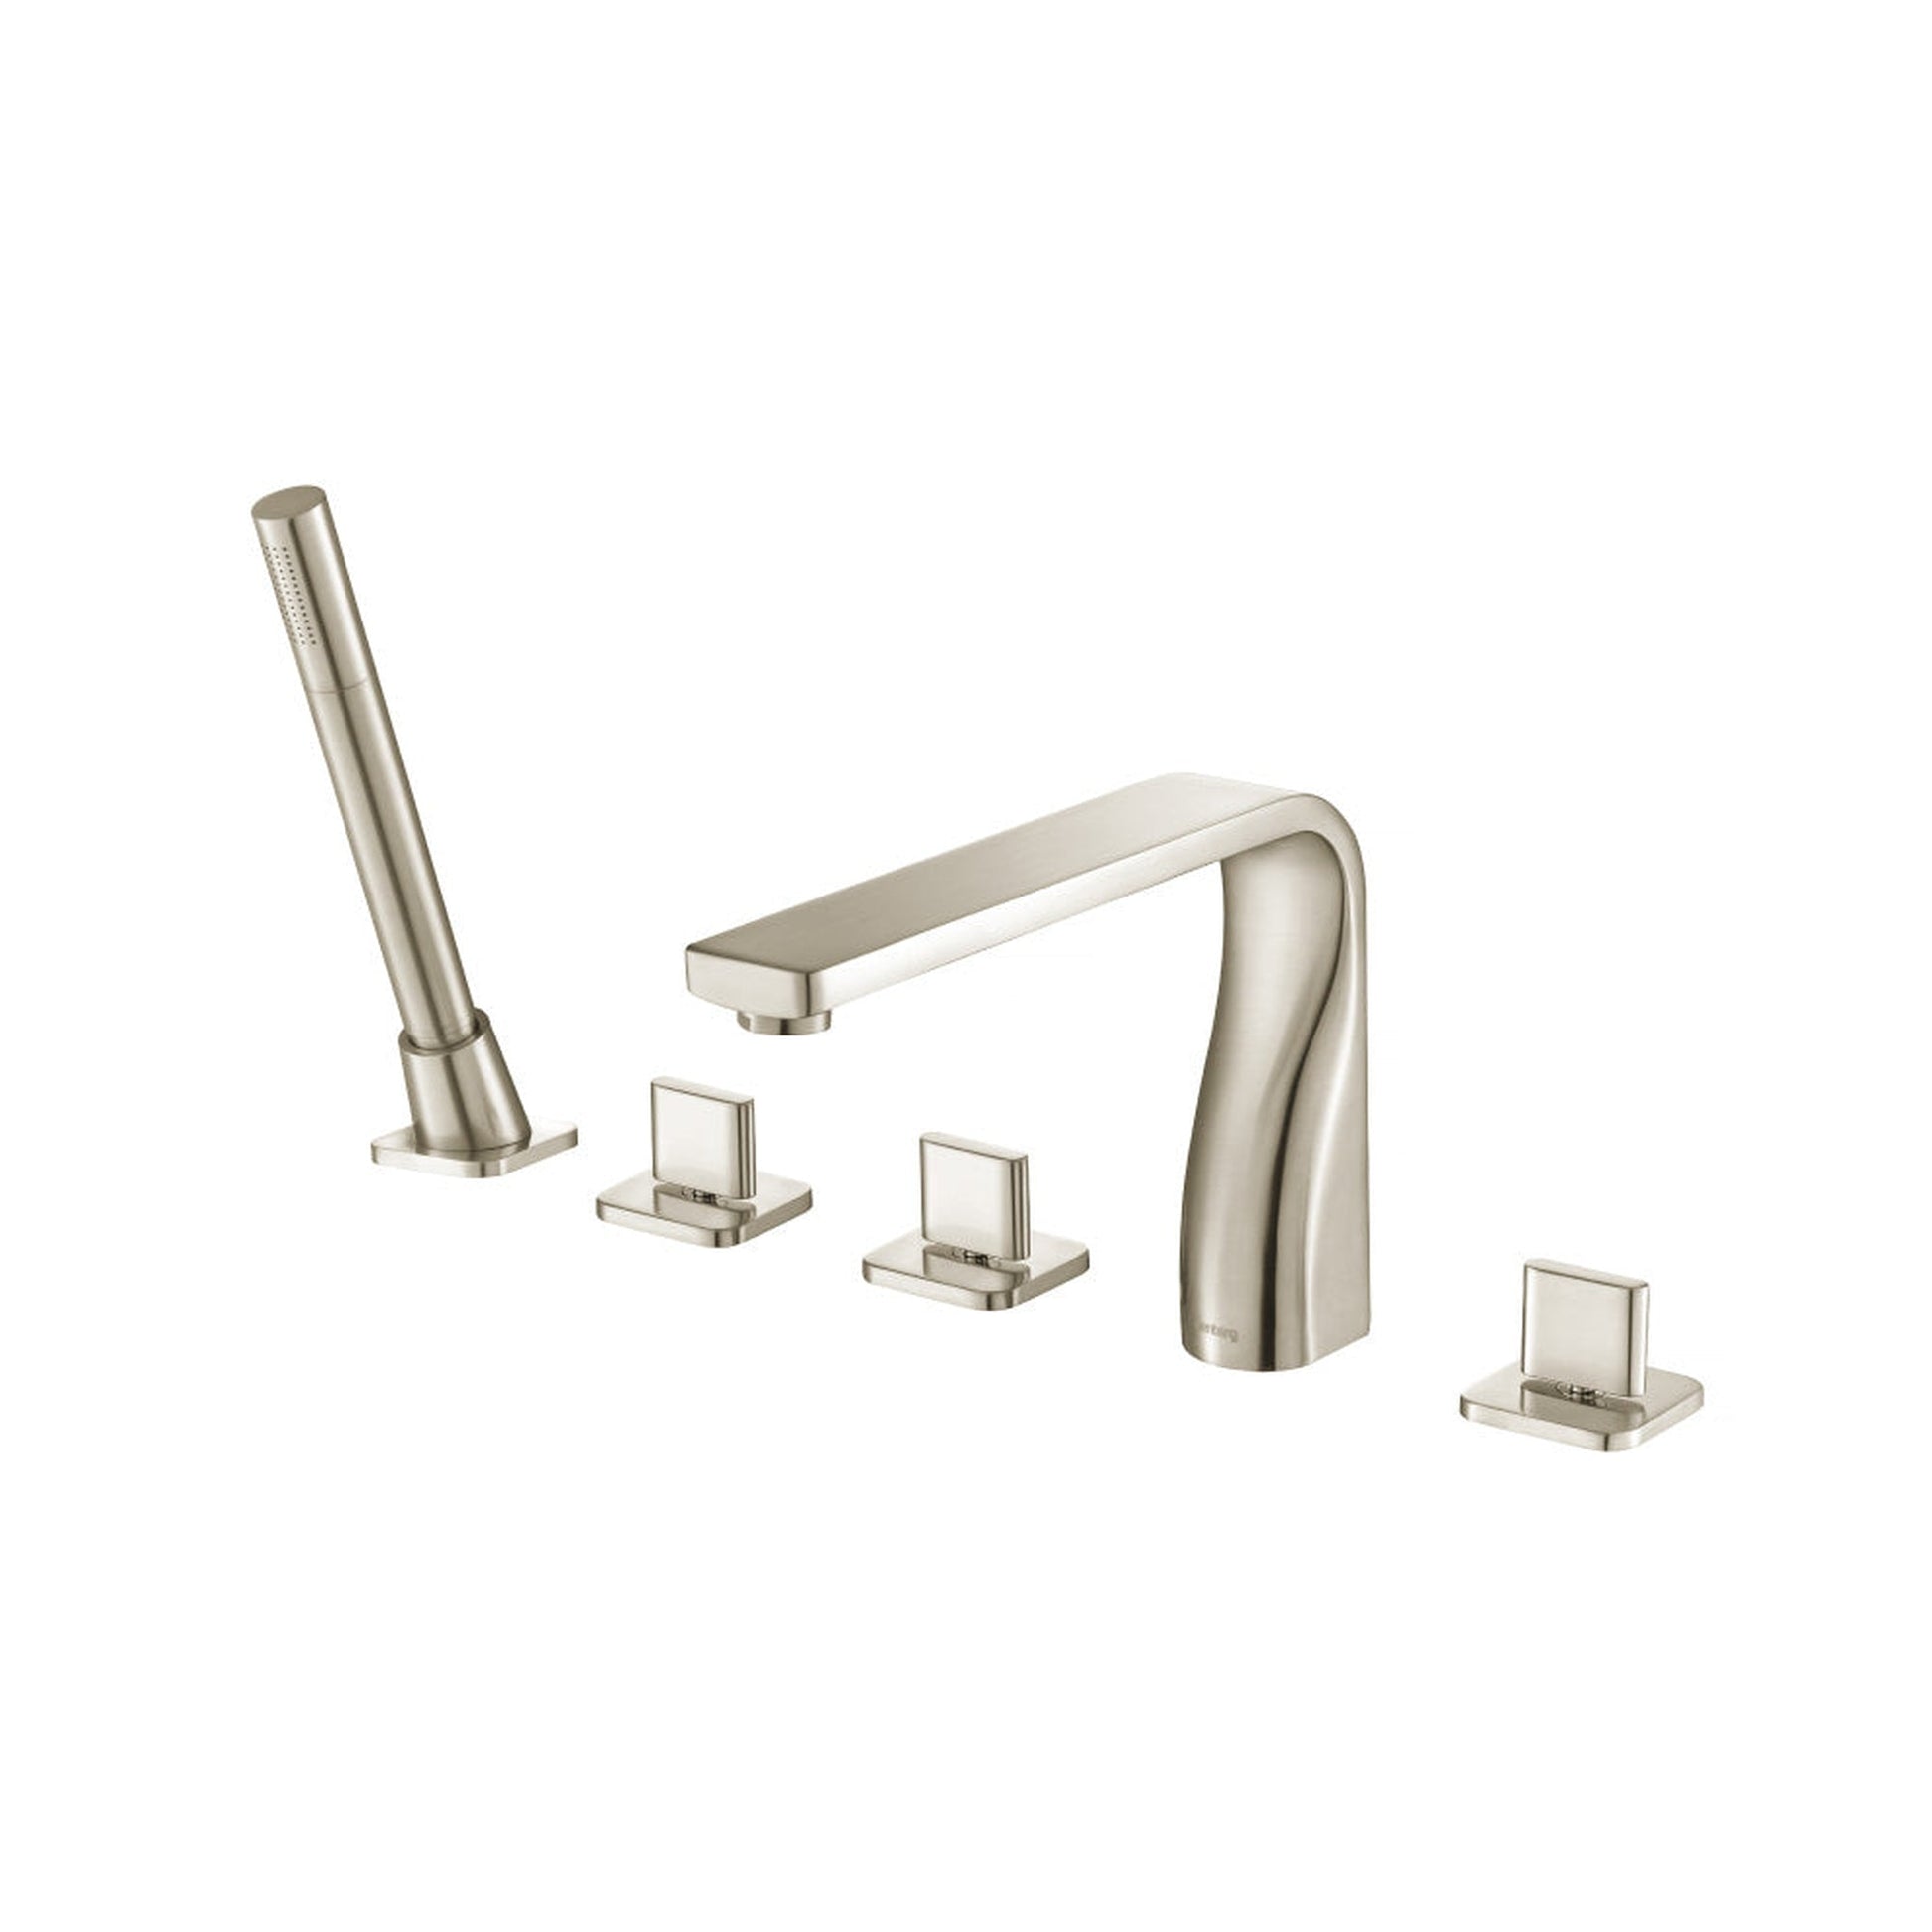 Isenberg Serie 260 Five Hole Deck Mounted Roman Tub Faucet With Hand Shower in Brushed Nickel